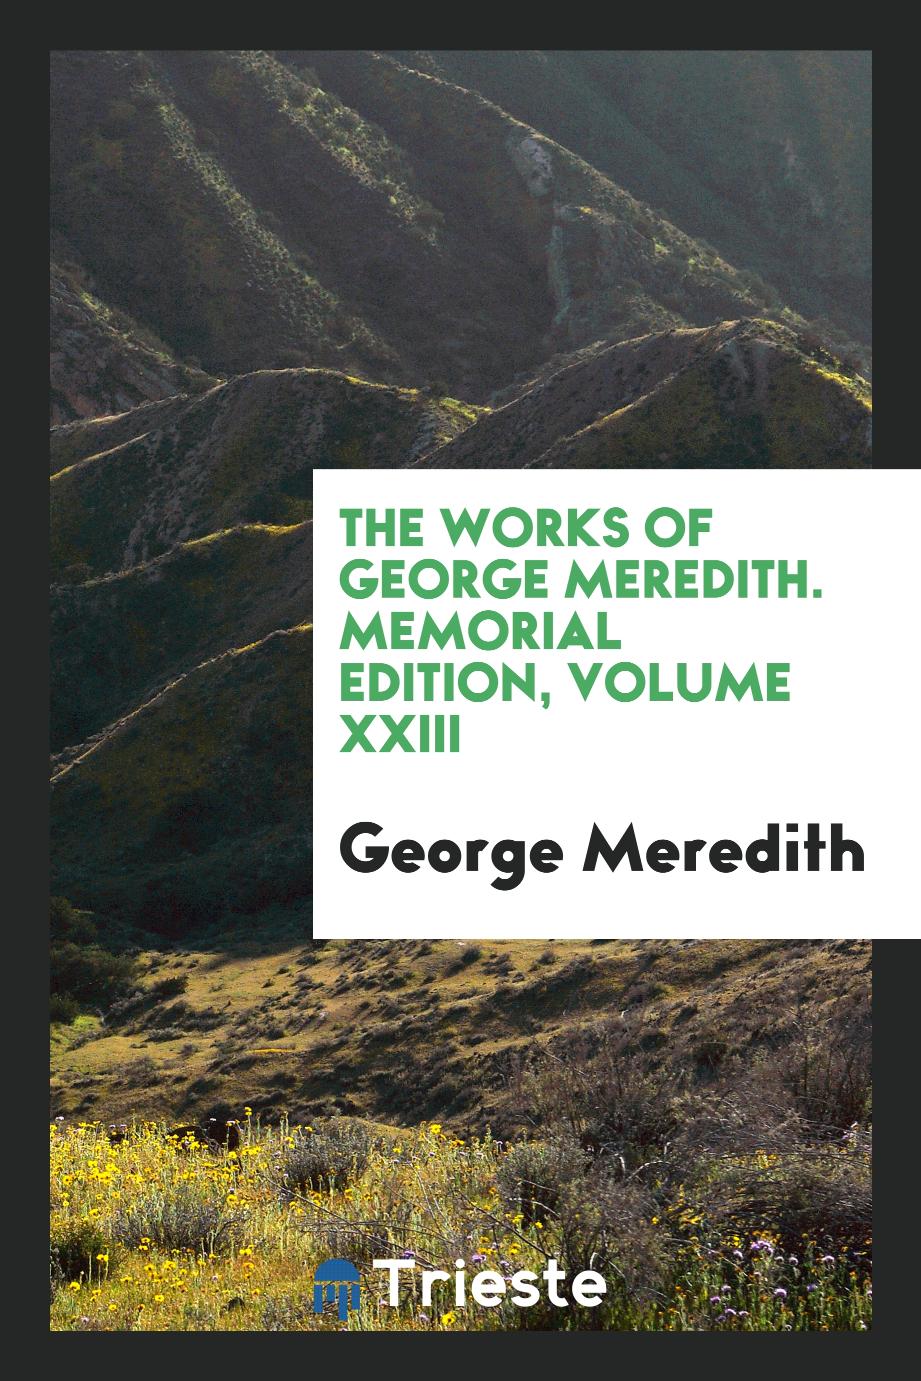 The works of George Meredith. Memorial edition, volume XXIII